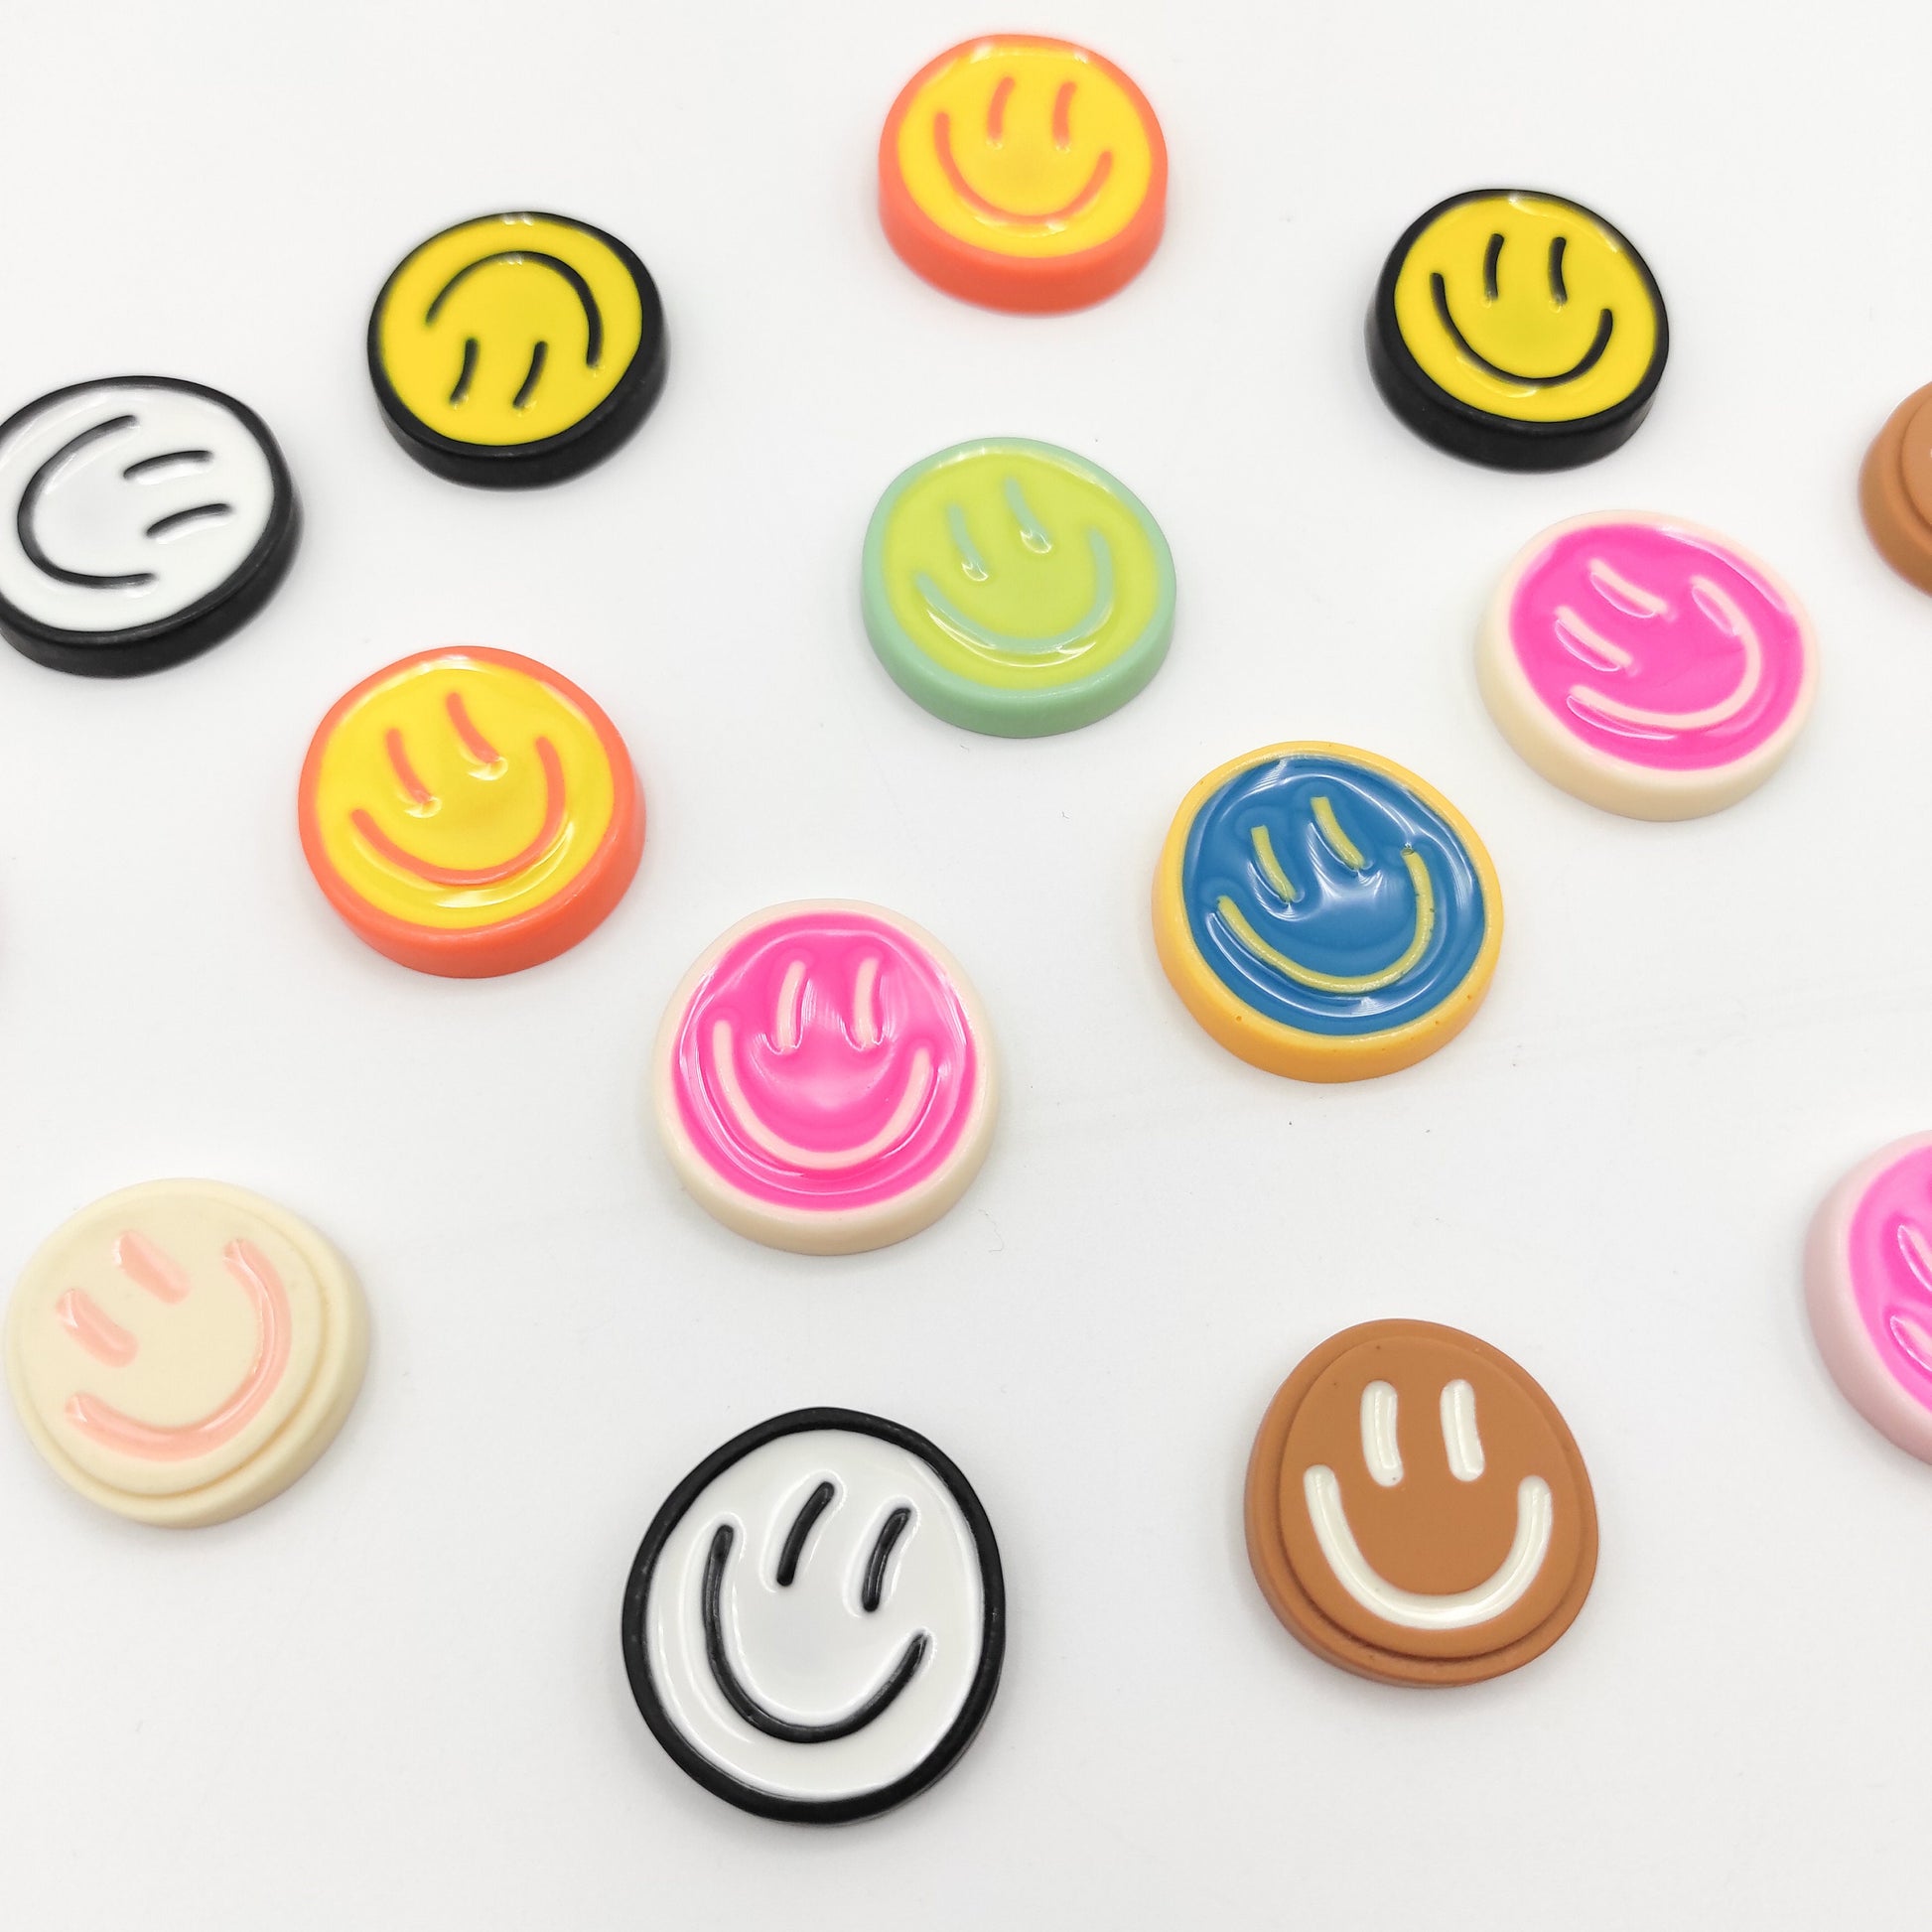 Smile Face Resin needle minders, Needle Minder for Embroidery